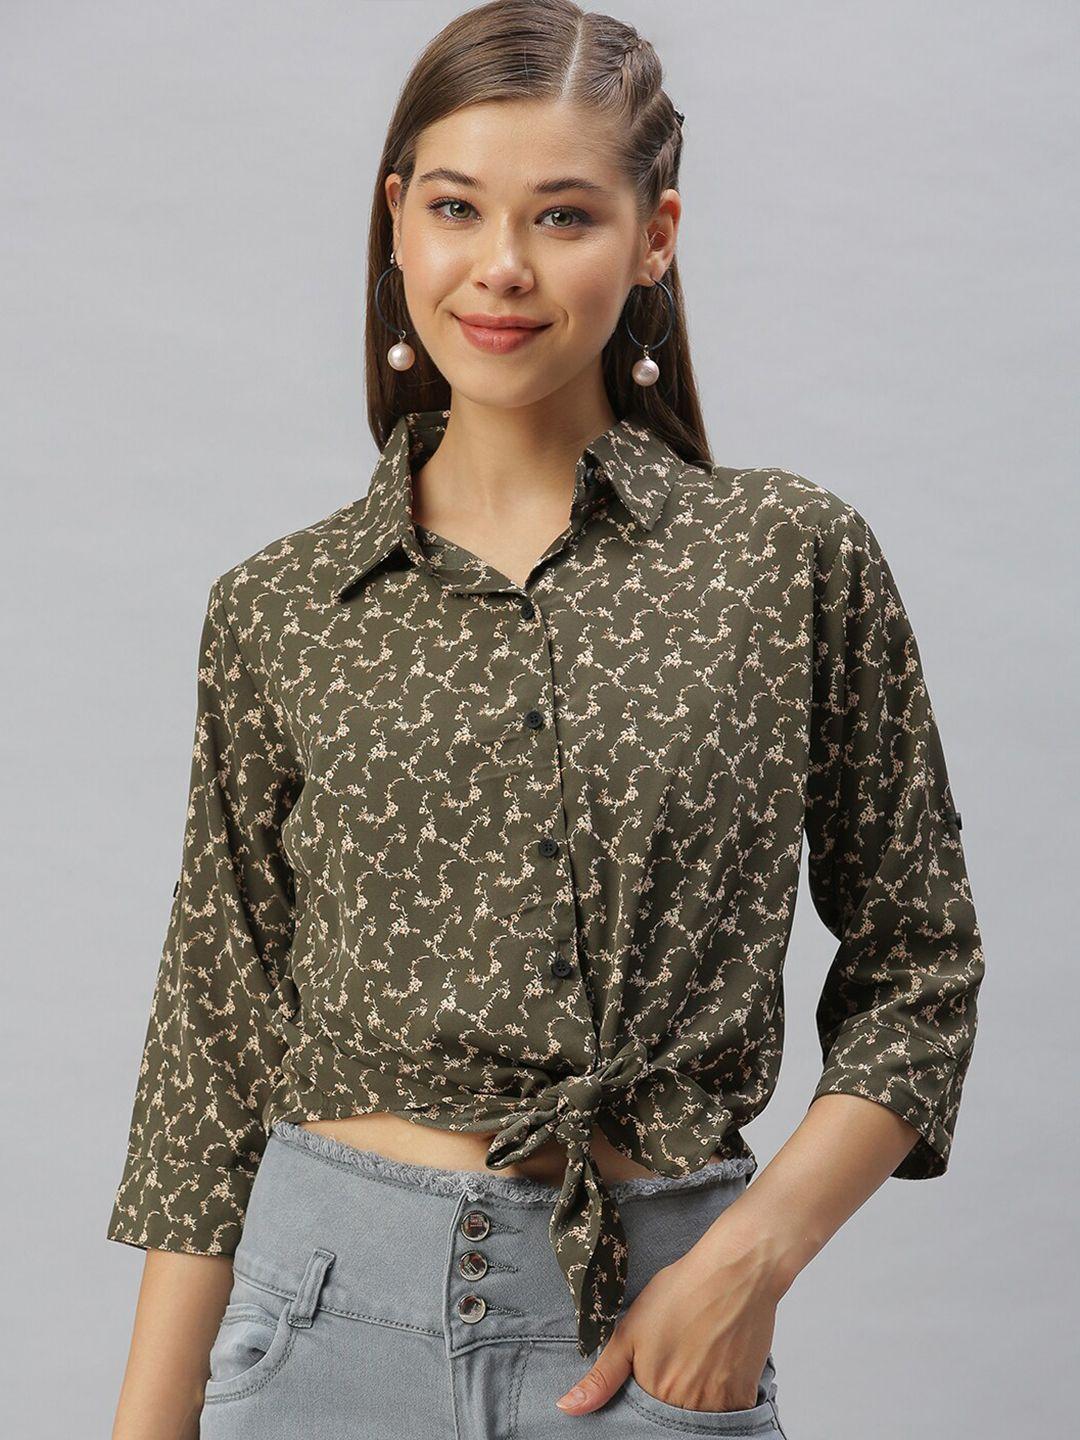 showoff-floral-printed-shirt-collar-waist-tie-ups-georgette-shirt-style-top